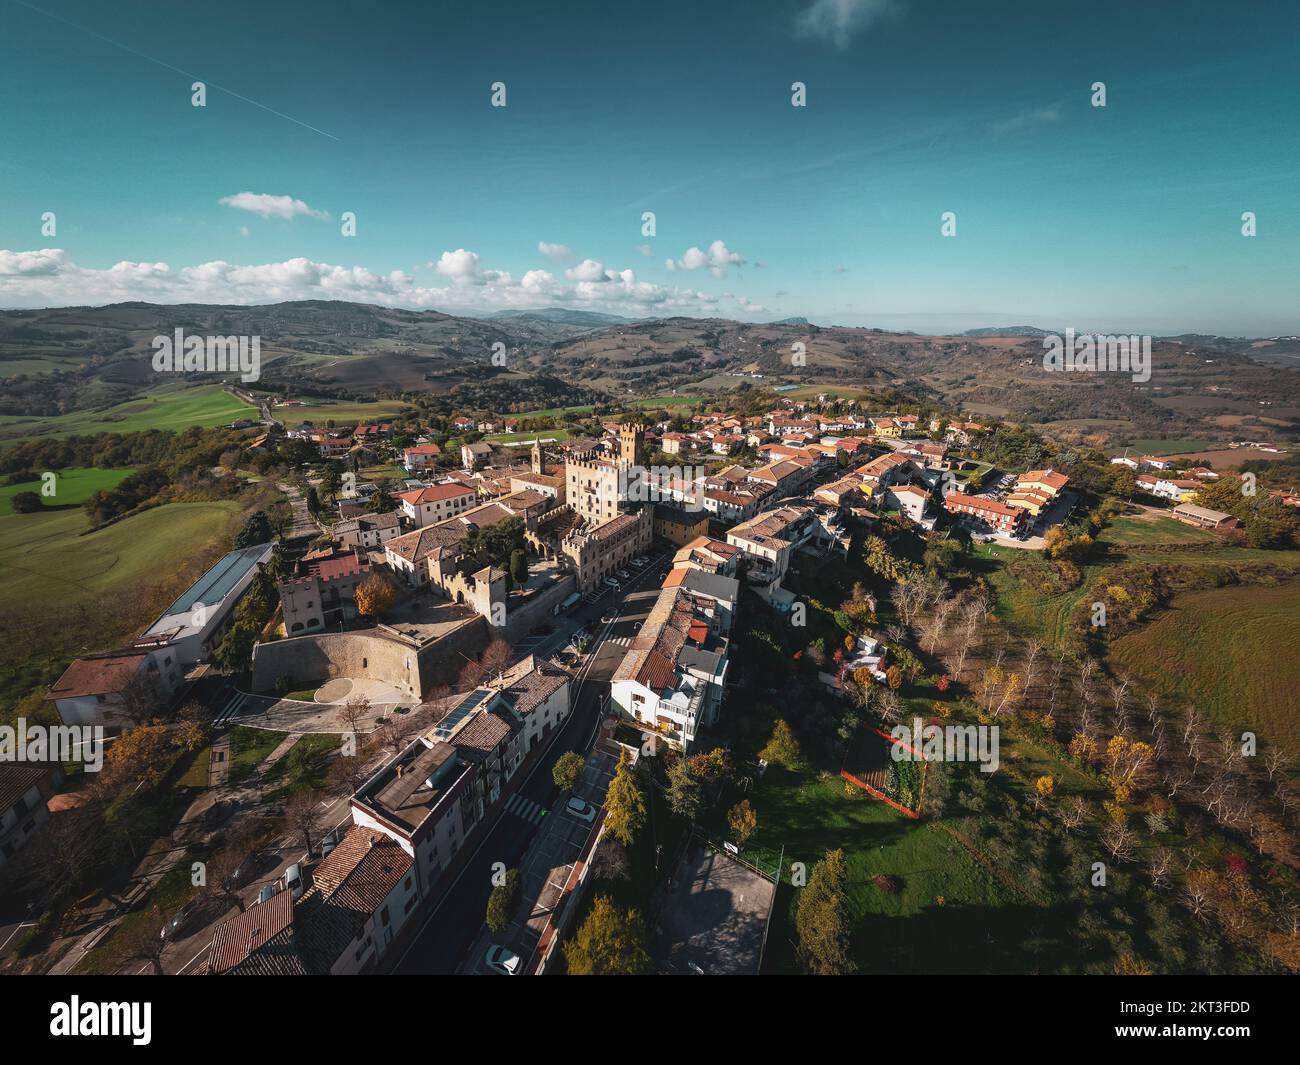 Italy, November 26, 2022: aerial view of village of montecchio in the province of Pesaro and Urbino in the Marche region Stock Photo